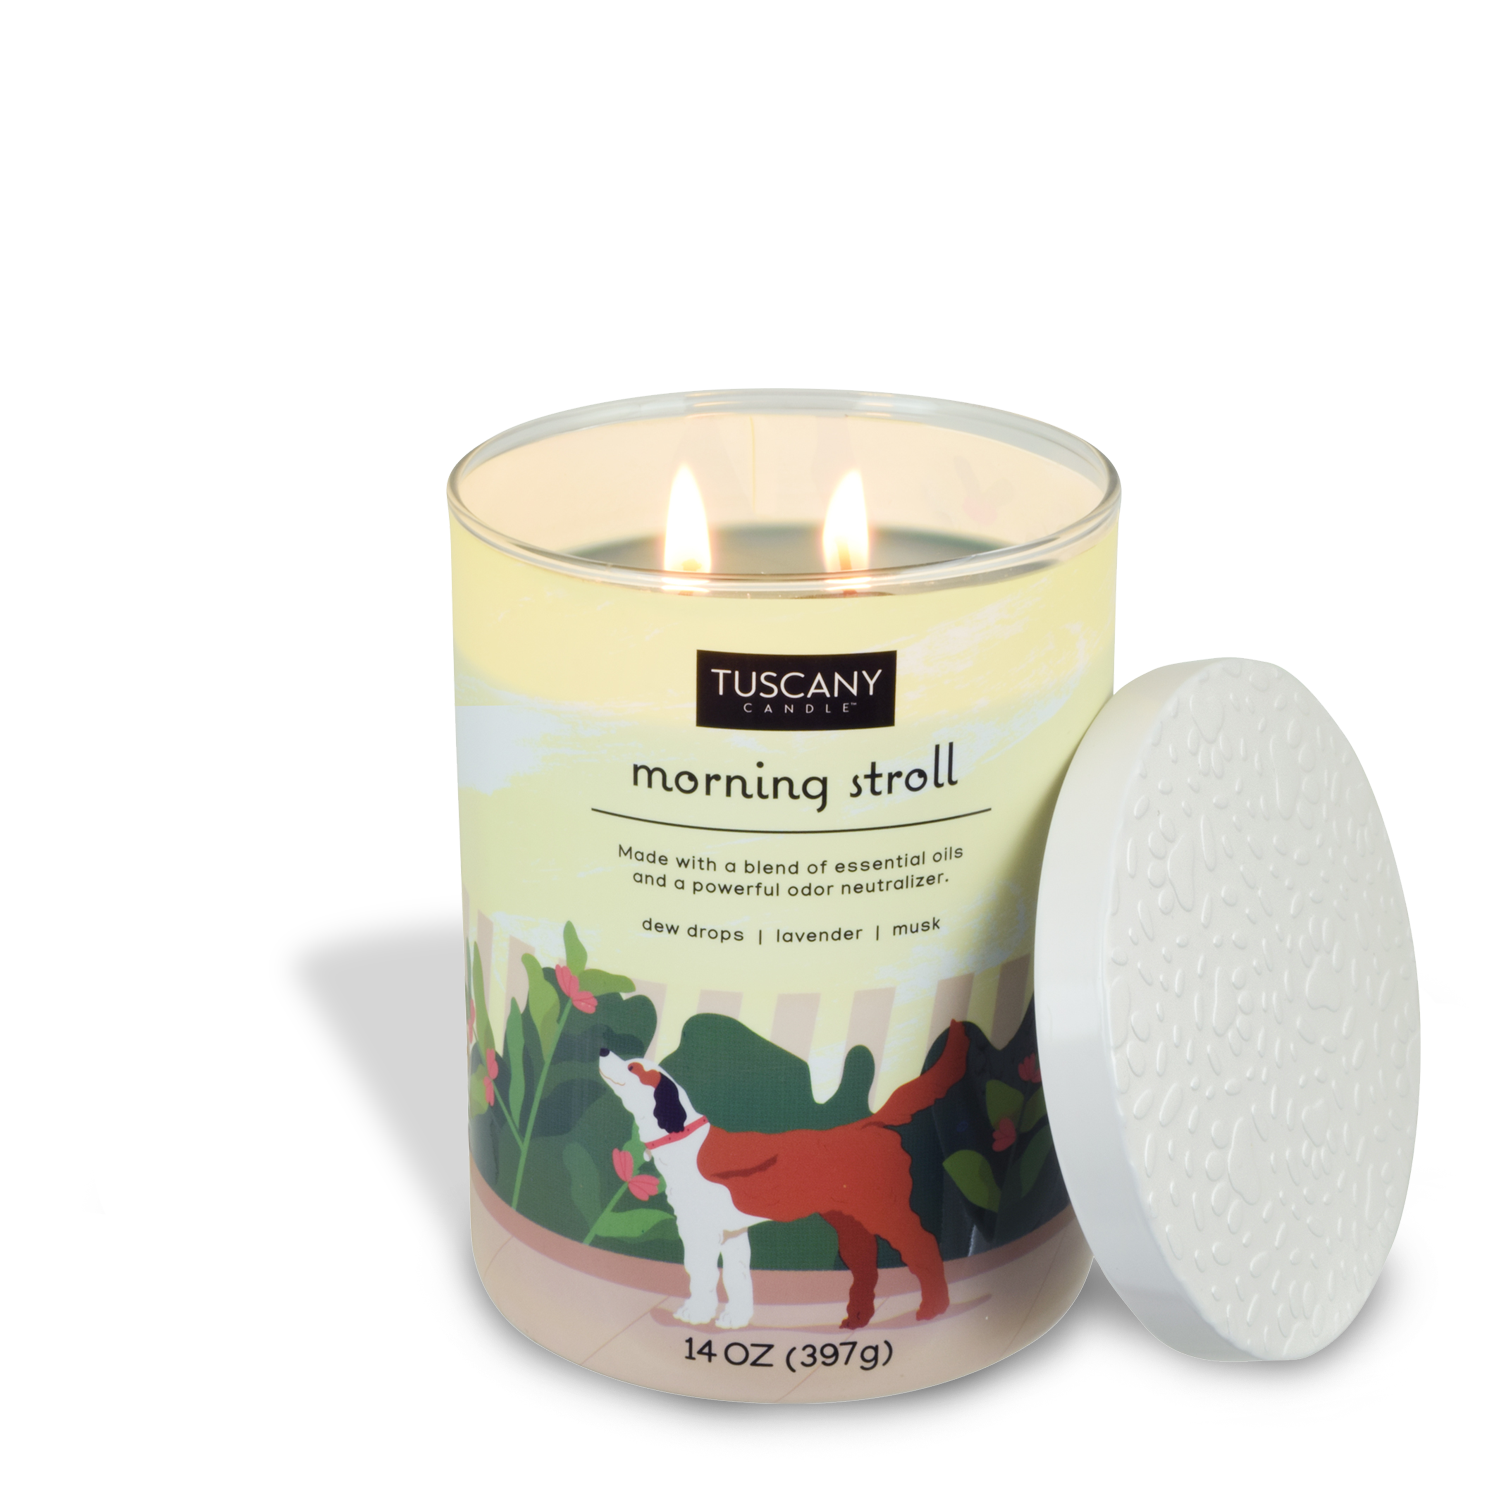 A Morning Stroll scented jar candle (14 oz) from Tuscany Candle, designed to neutralize pet odors.